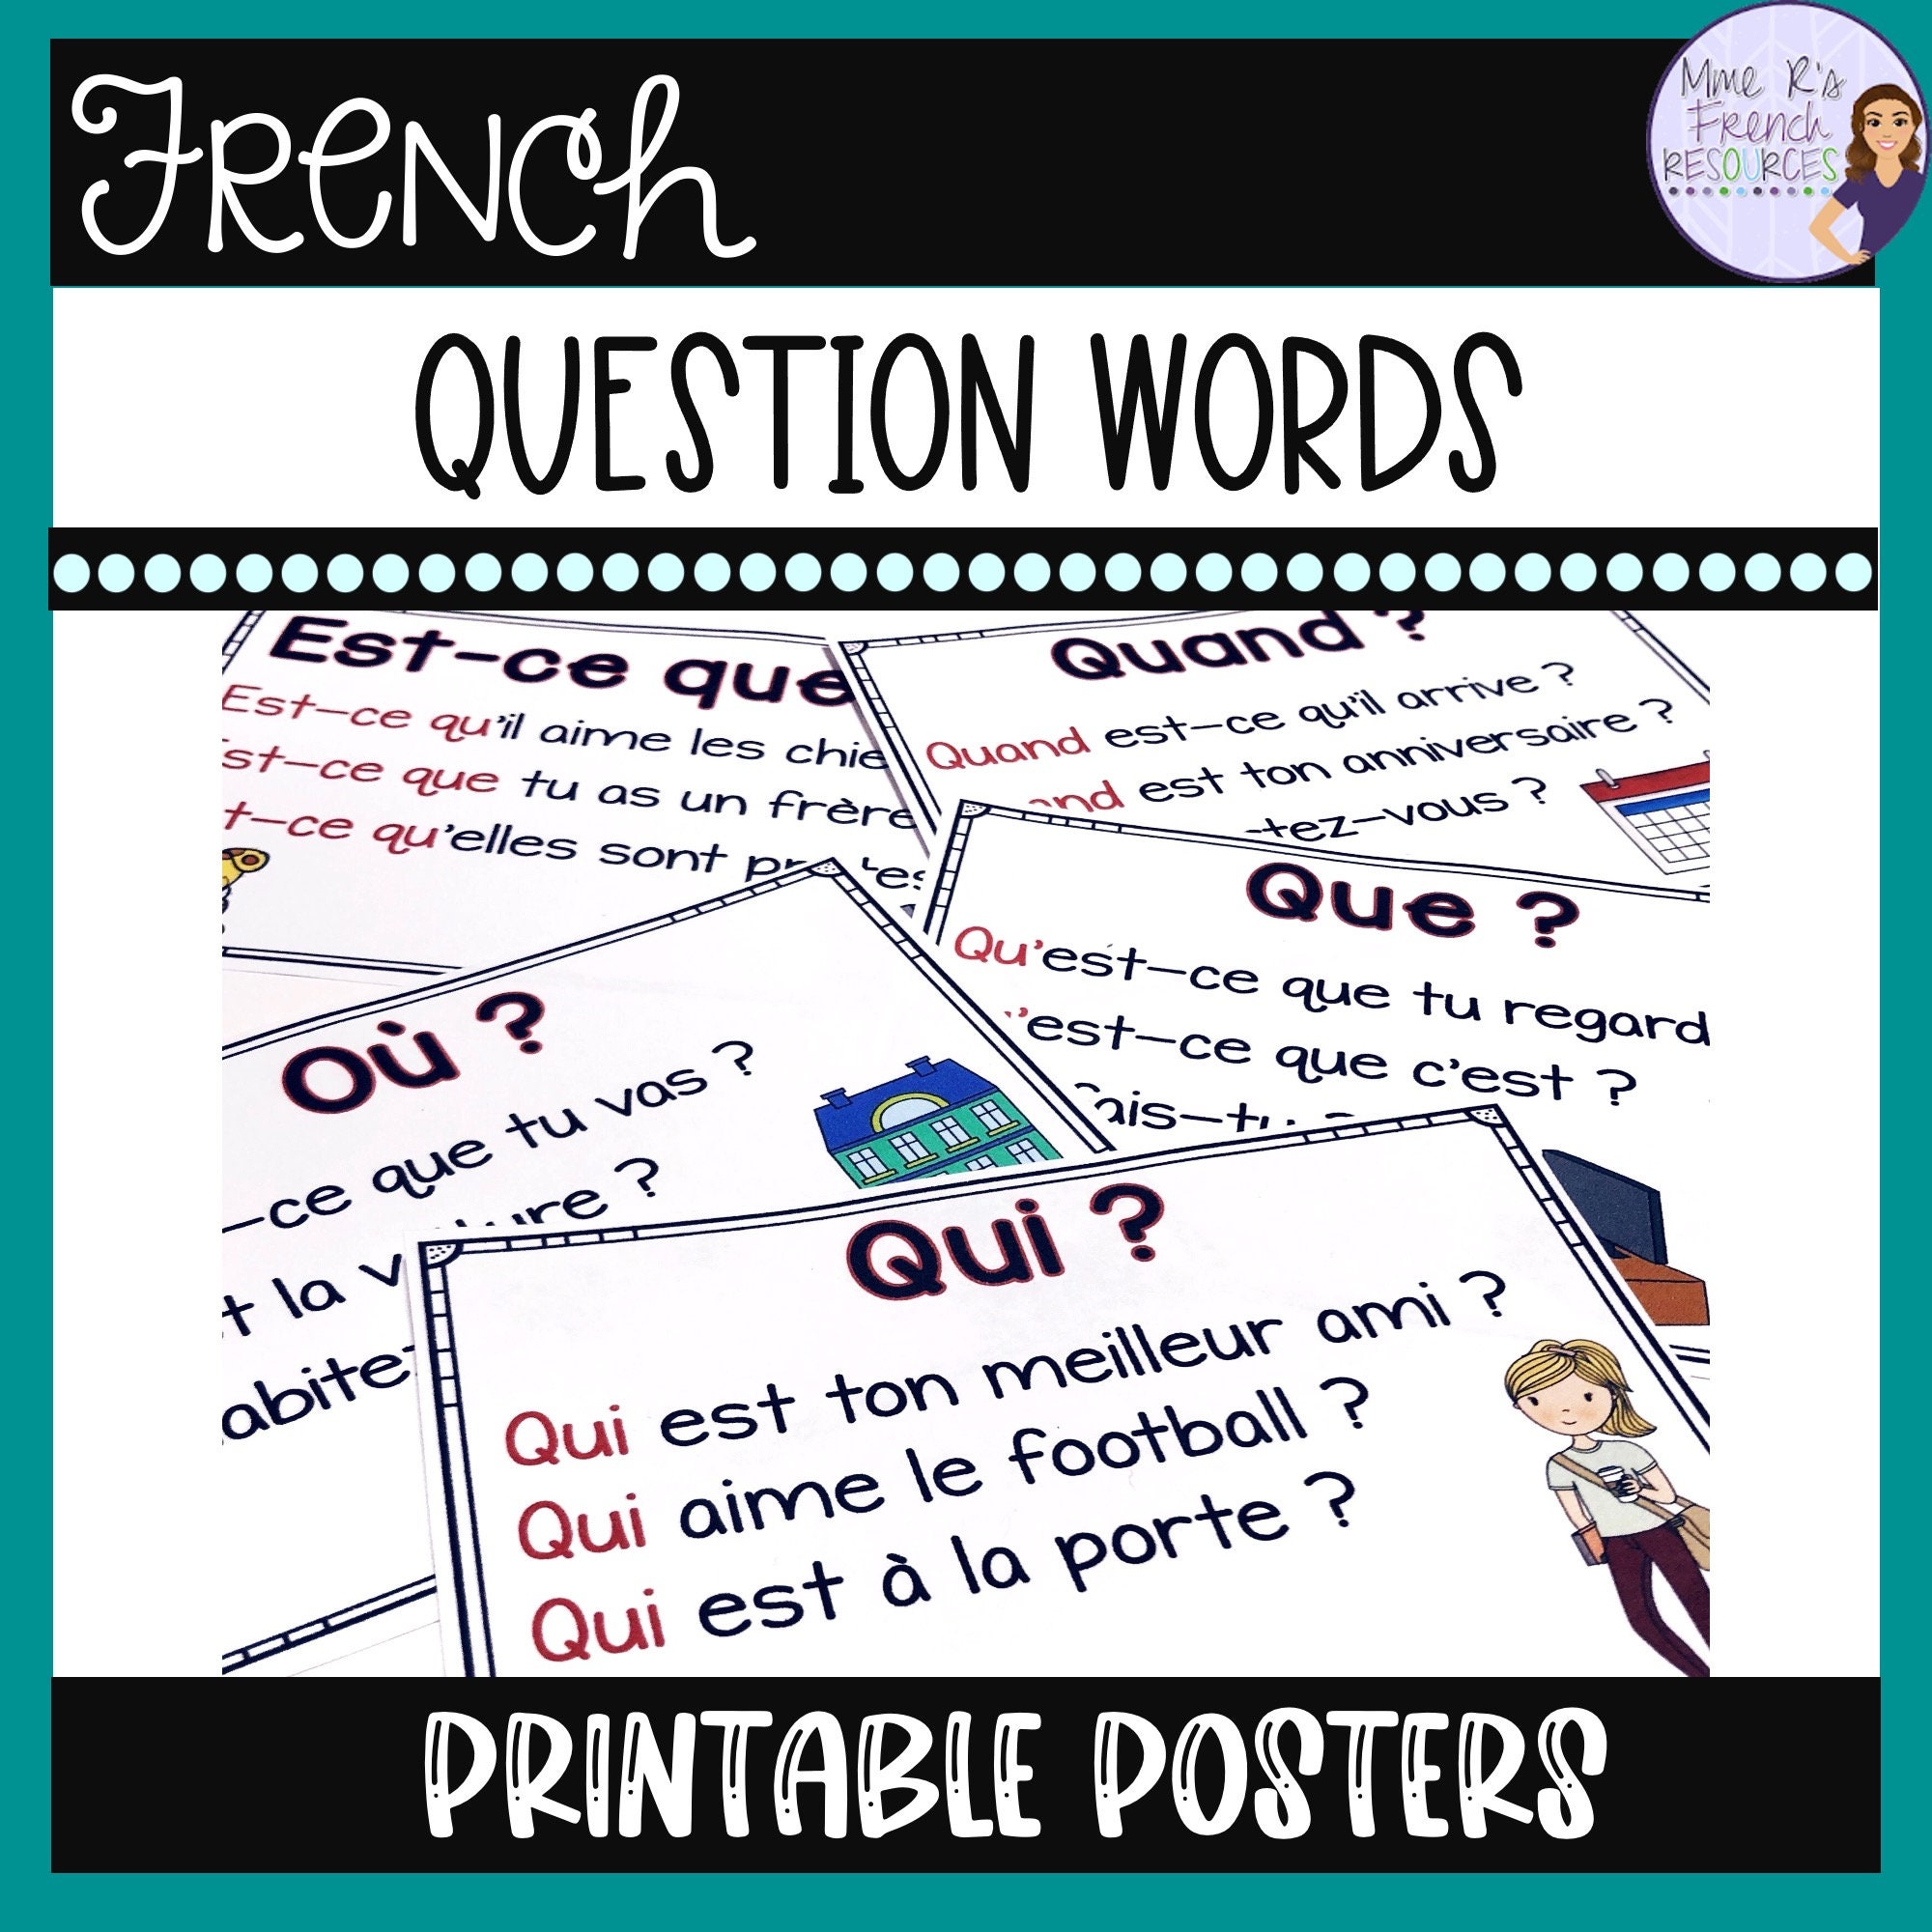 Fun and easy ideas for teaching French adjectives - Mme R's French Resources